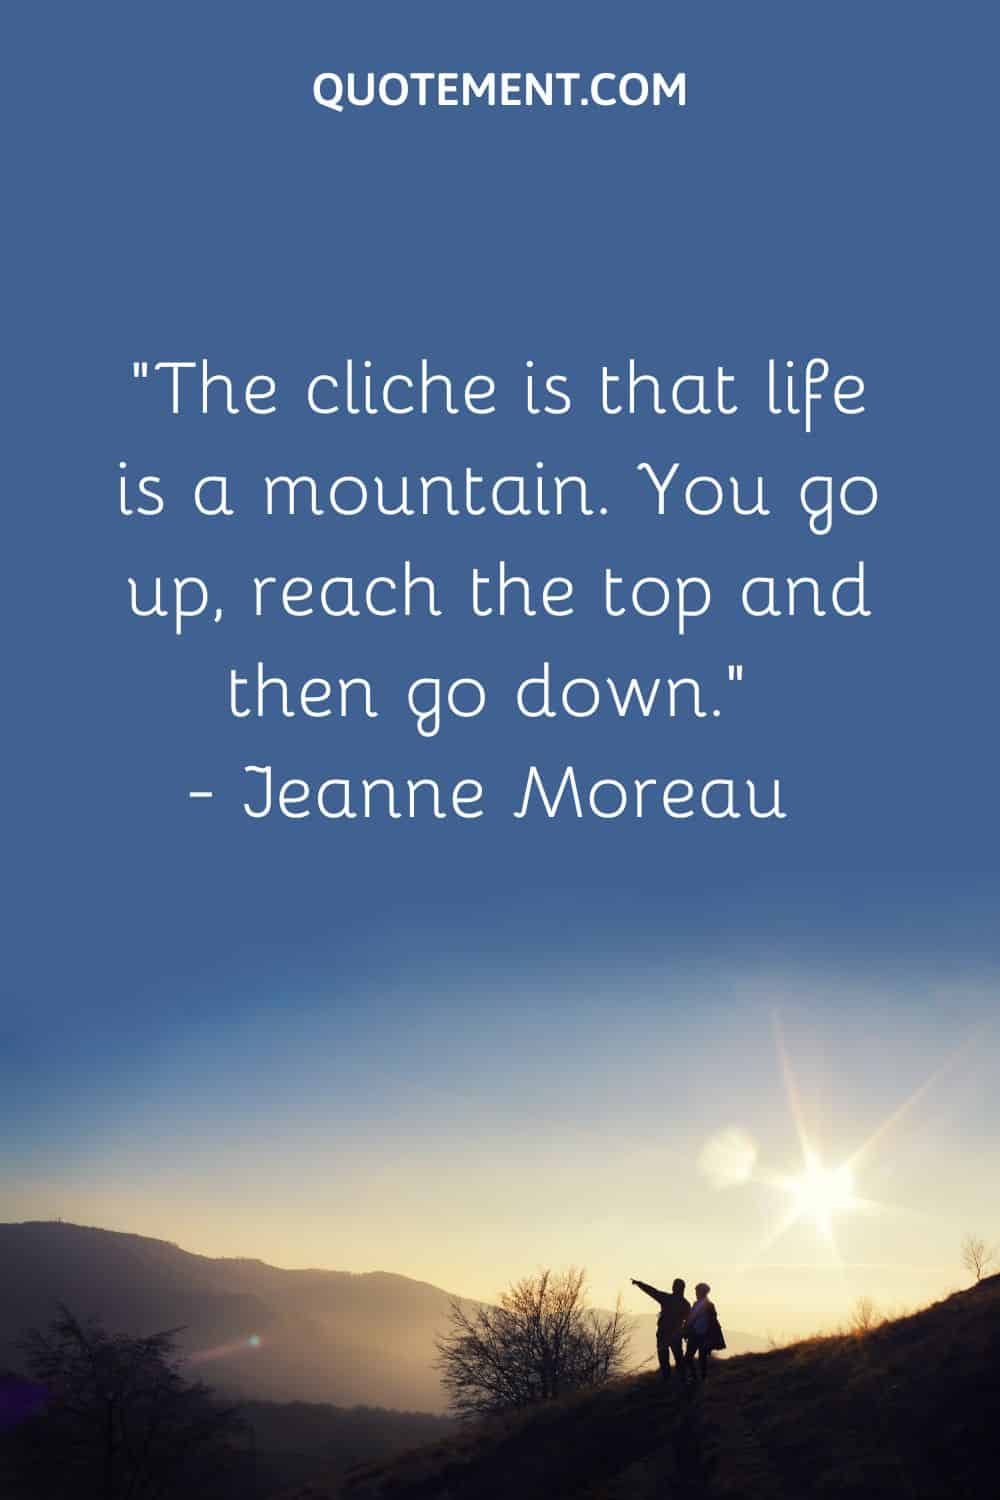 “The cliche is that life is a mountain. You go up, reach the top and then go down.” — Jeanne Moreau